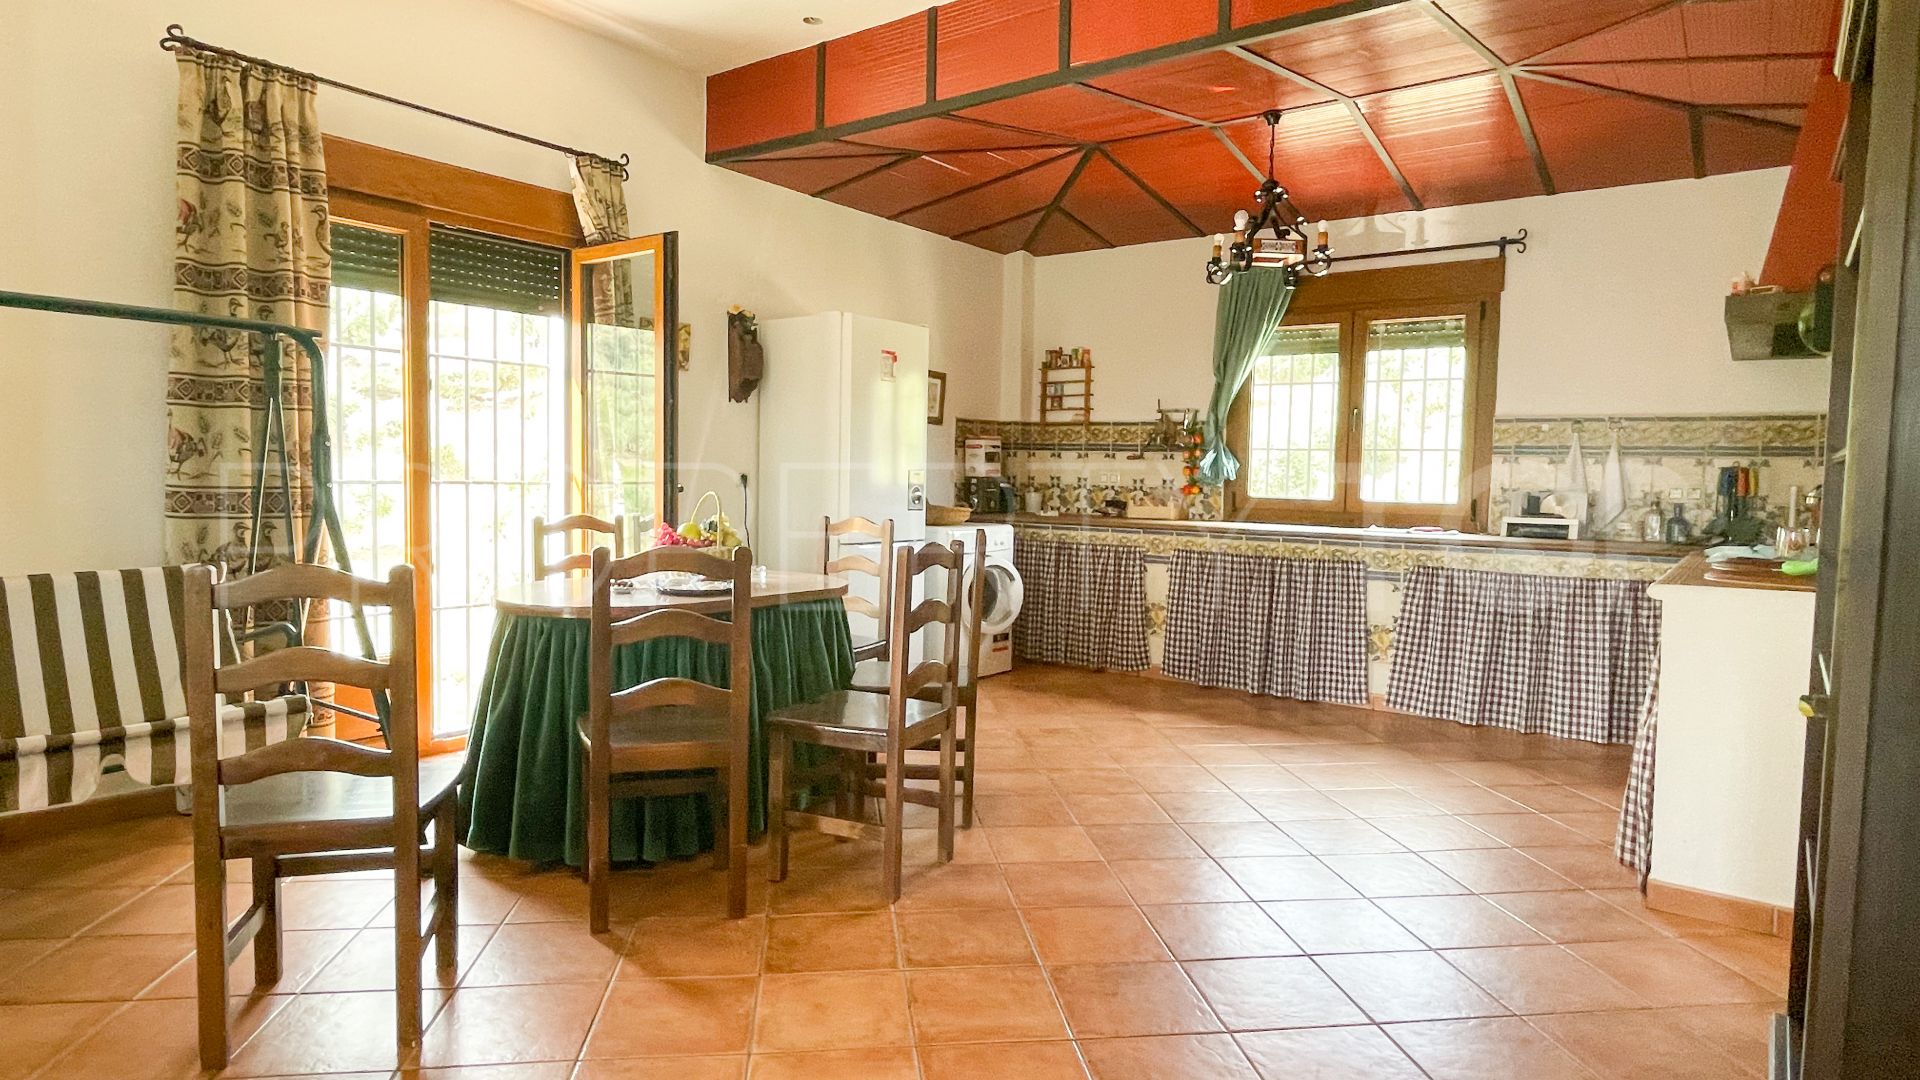 For sale country house in Priego de Cordoba